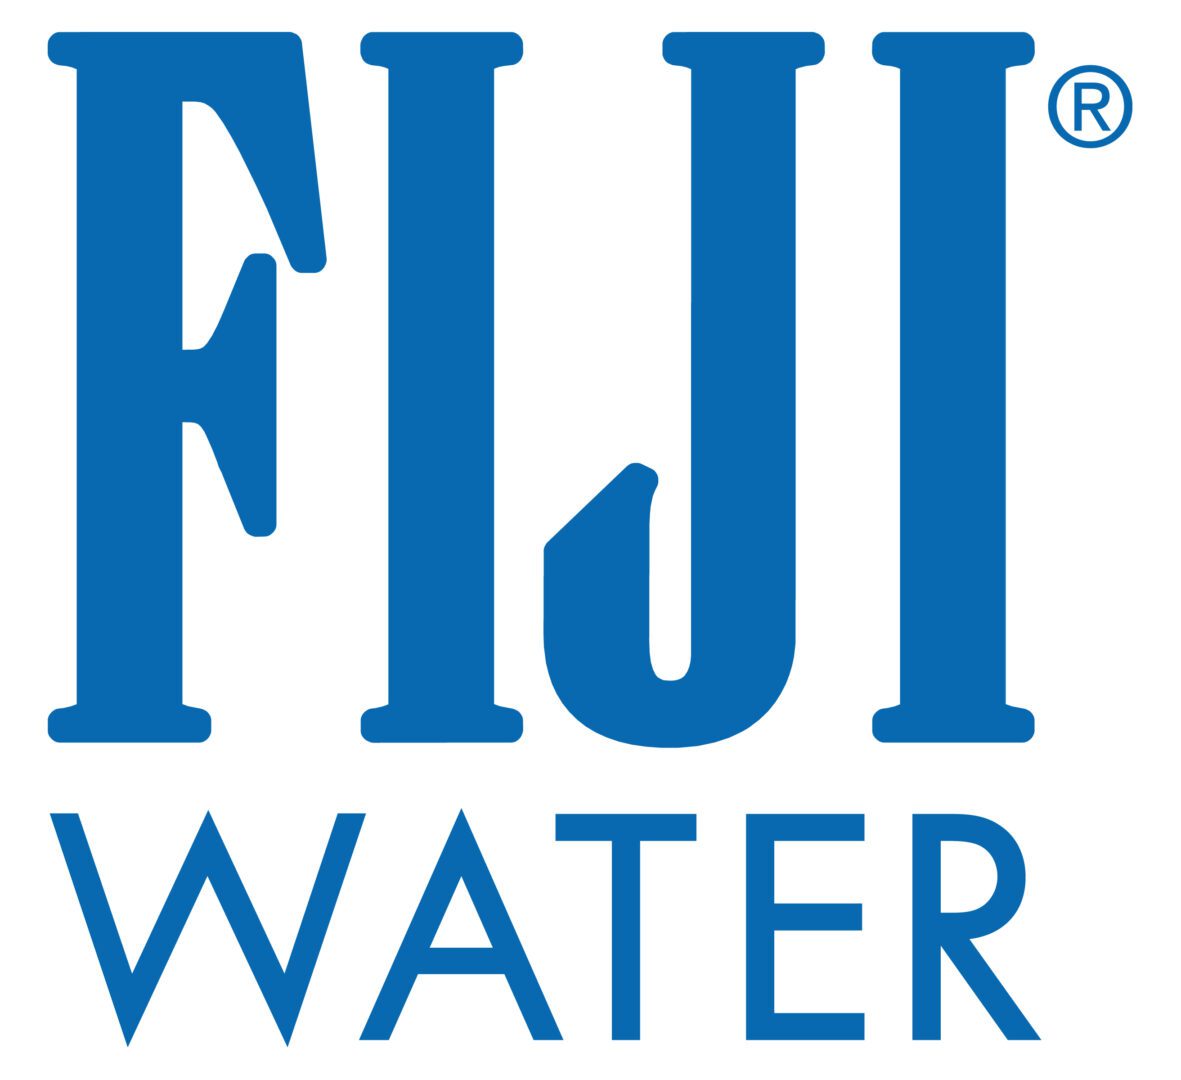 A blue and white logo of fiji water.